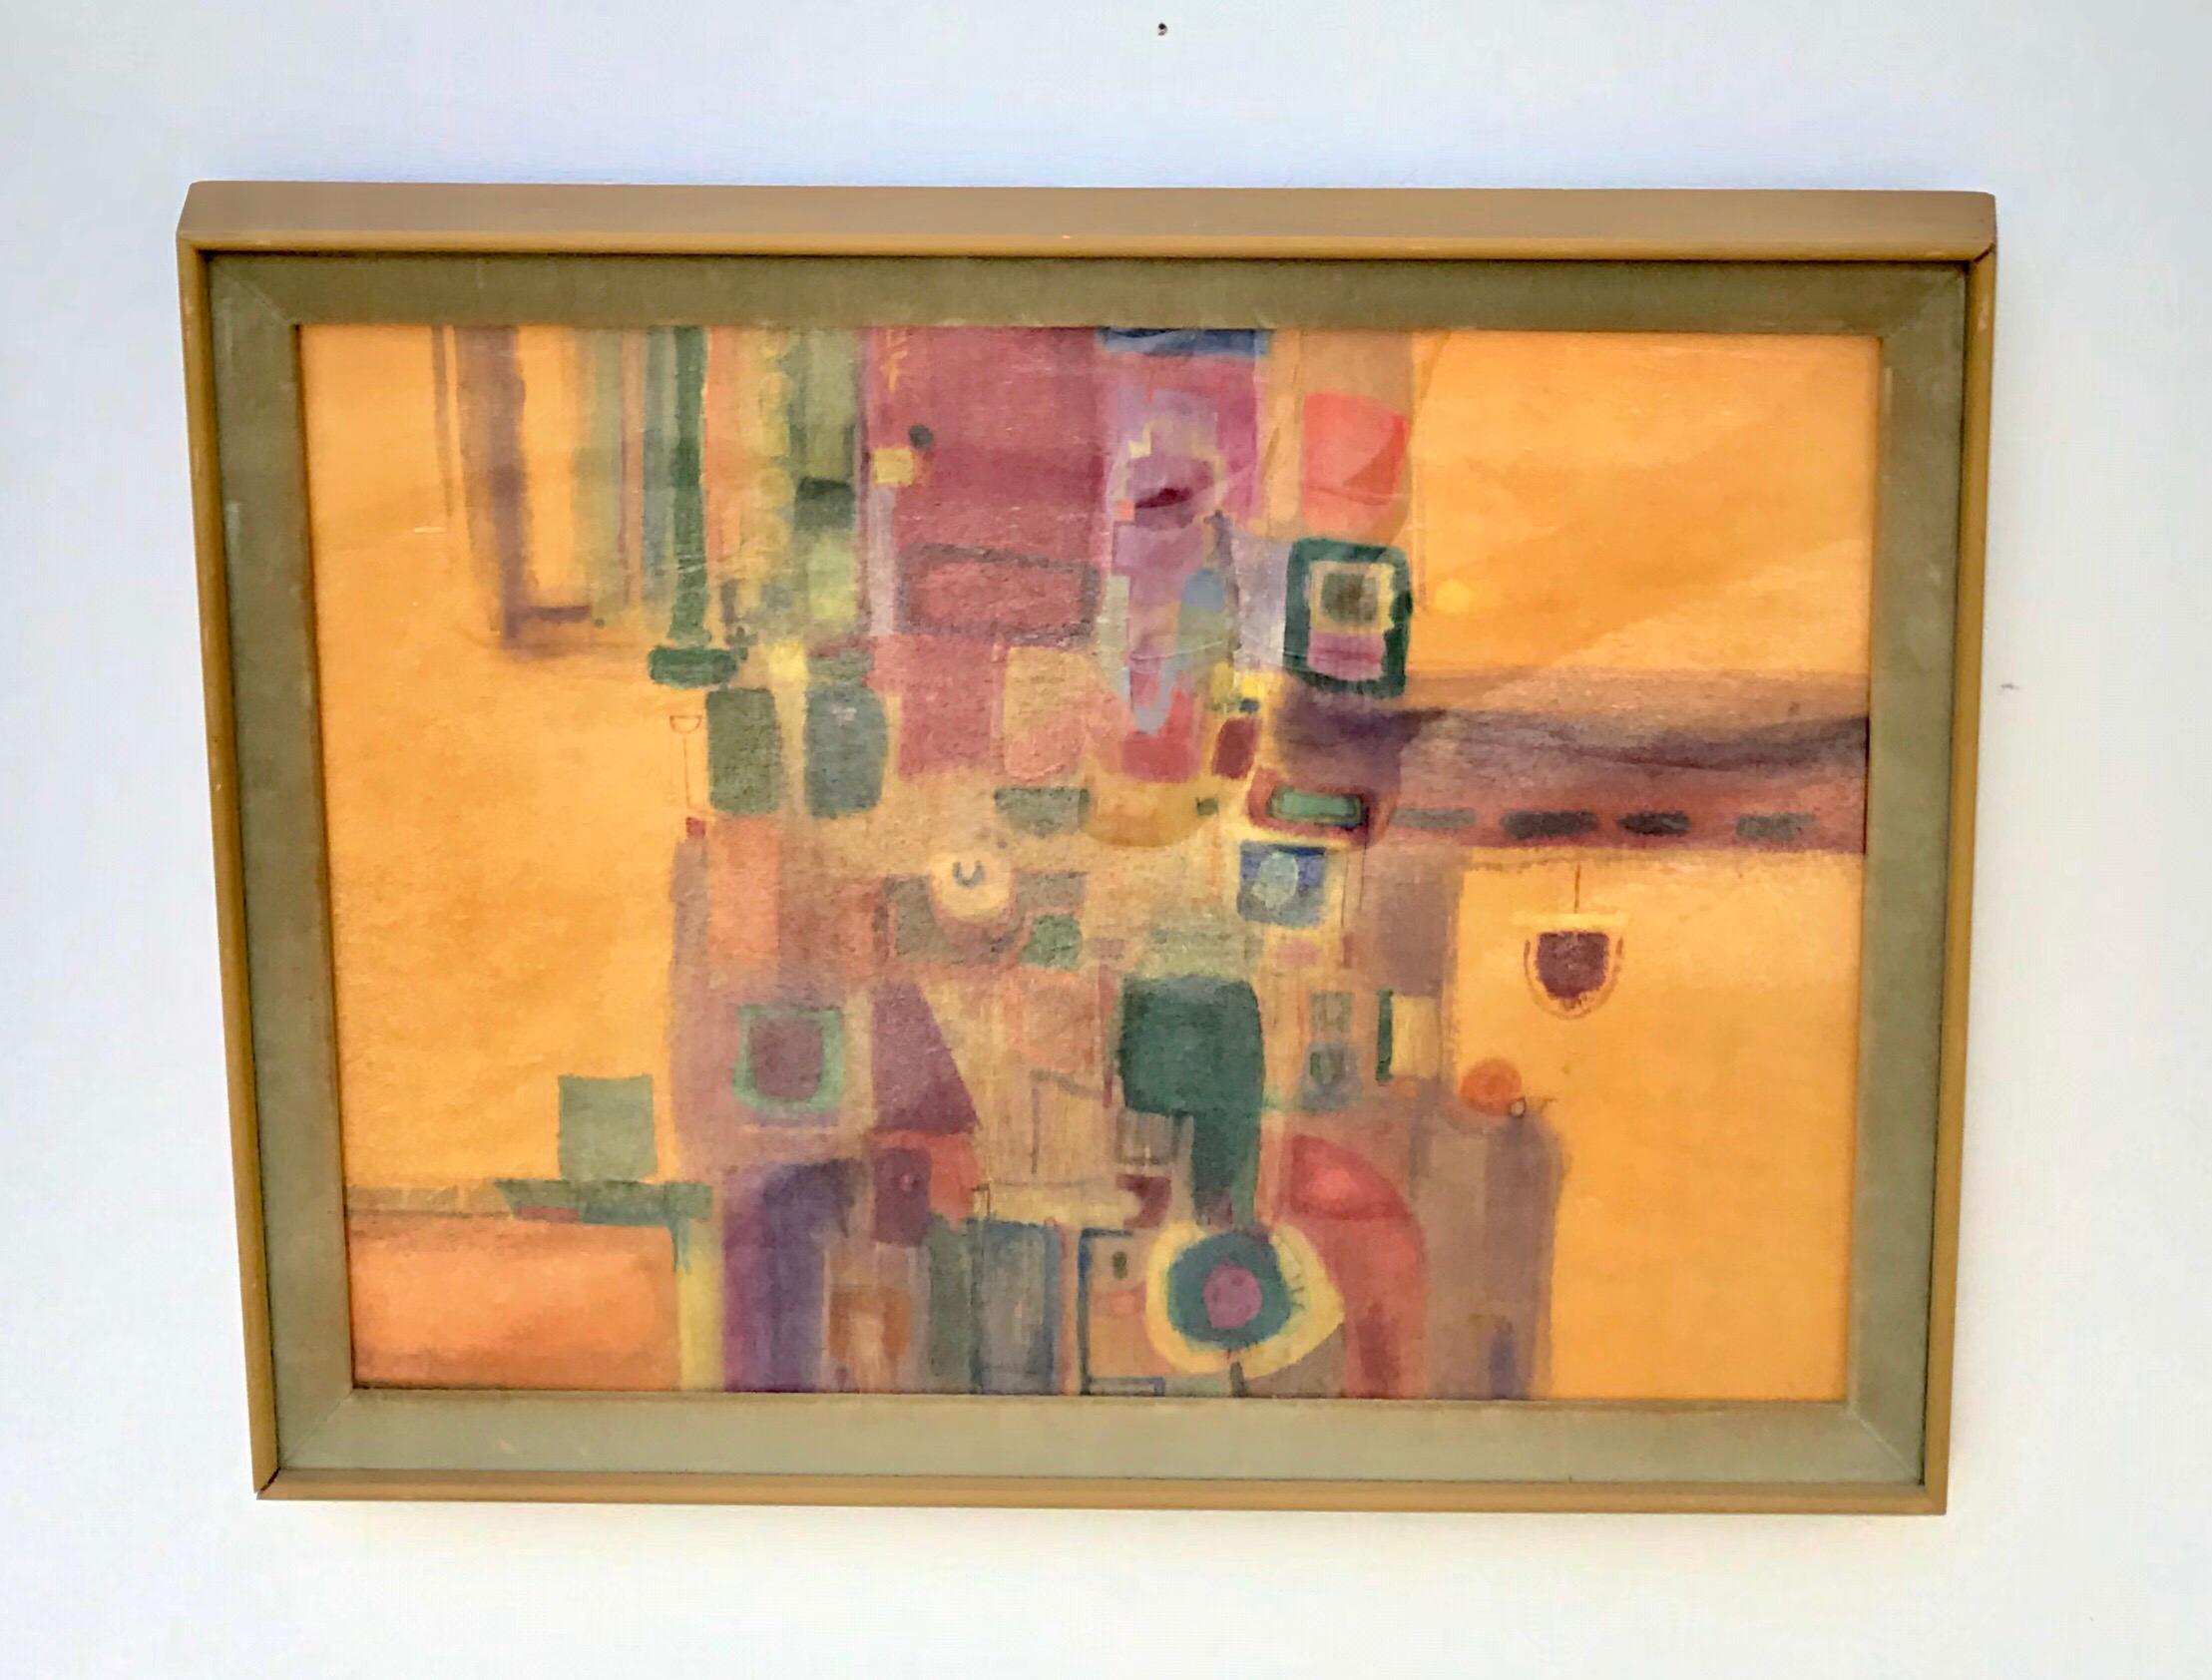 A great looking Mid-Century Modern framed watercolor by Artist David Johnston. The colorful palette of the Abstract work of art draws one in, and supplies rich and happy vibes anywhere the piece is employed. Older, possibly original frame shows wear